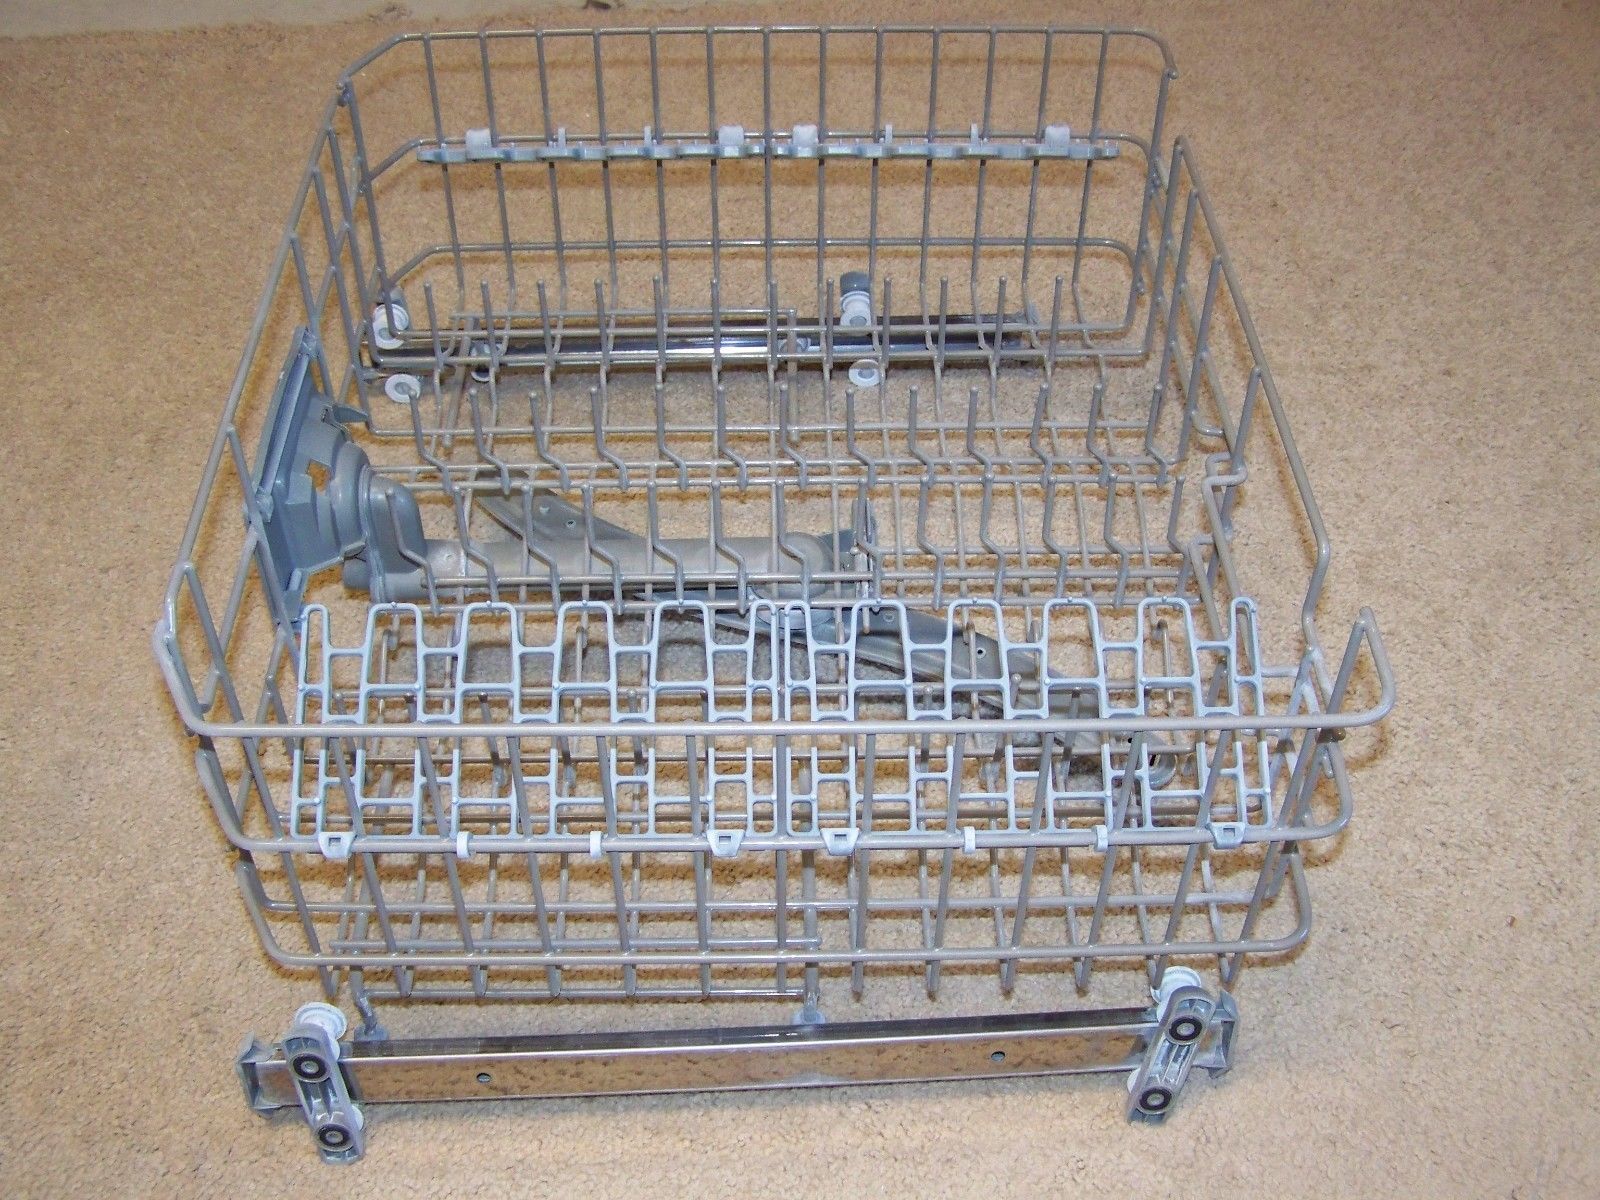 WPW10567657 WHIRLPOOL DISHWASHER UPPER RACK ASSEMBLY - Dishwasher Parts & Accessories